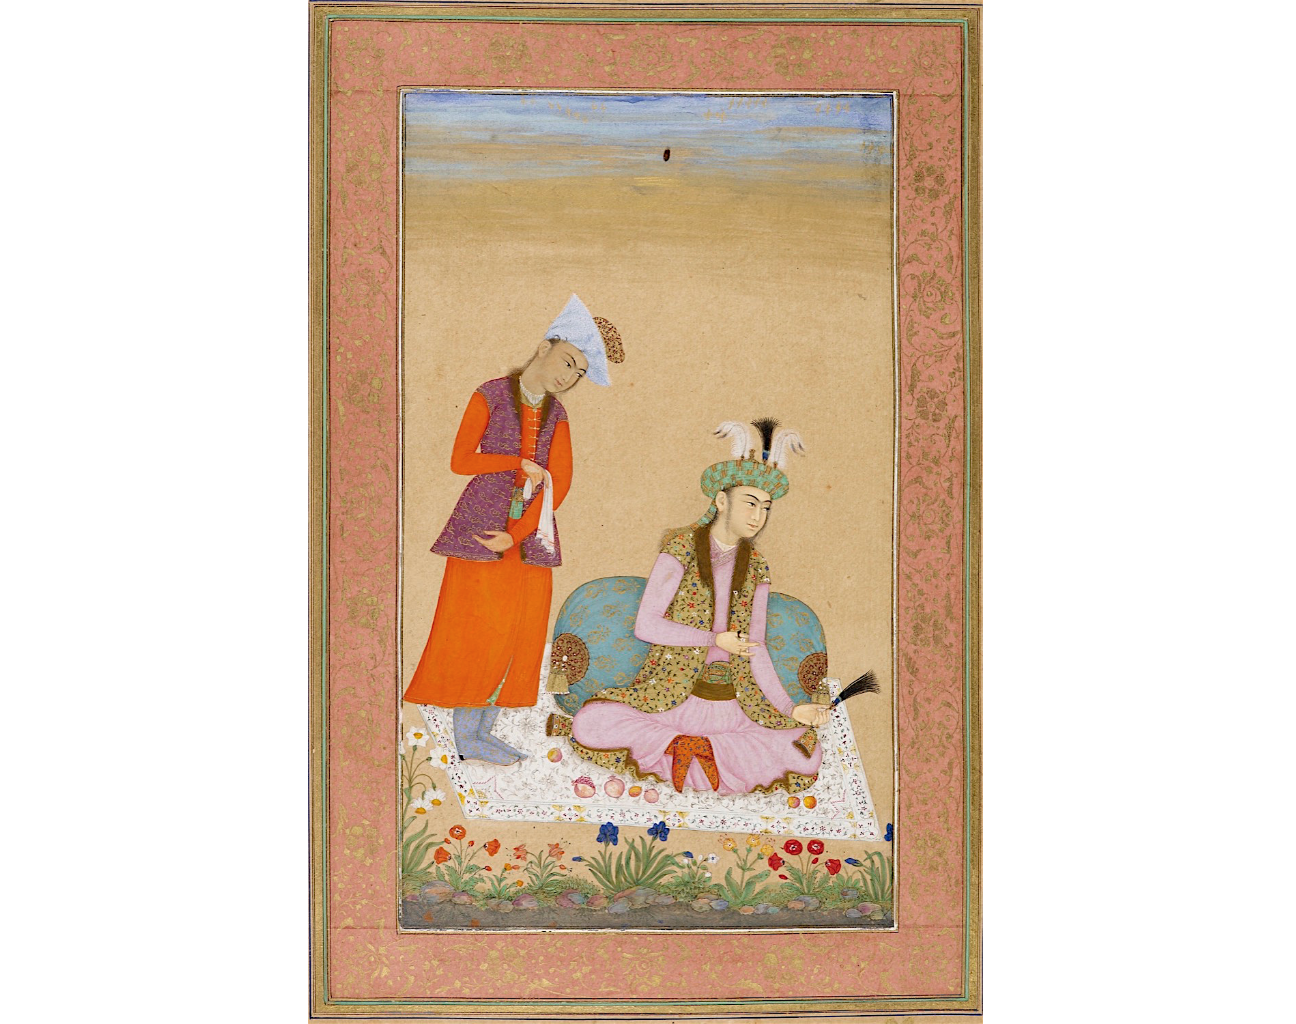 A Prince Holding A Turban Ornament, attributed to Muhammad Khan, c. 1633 33